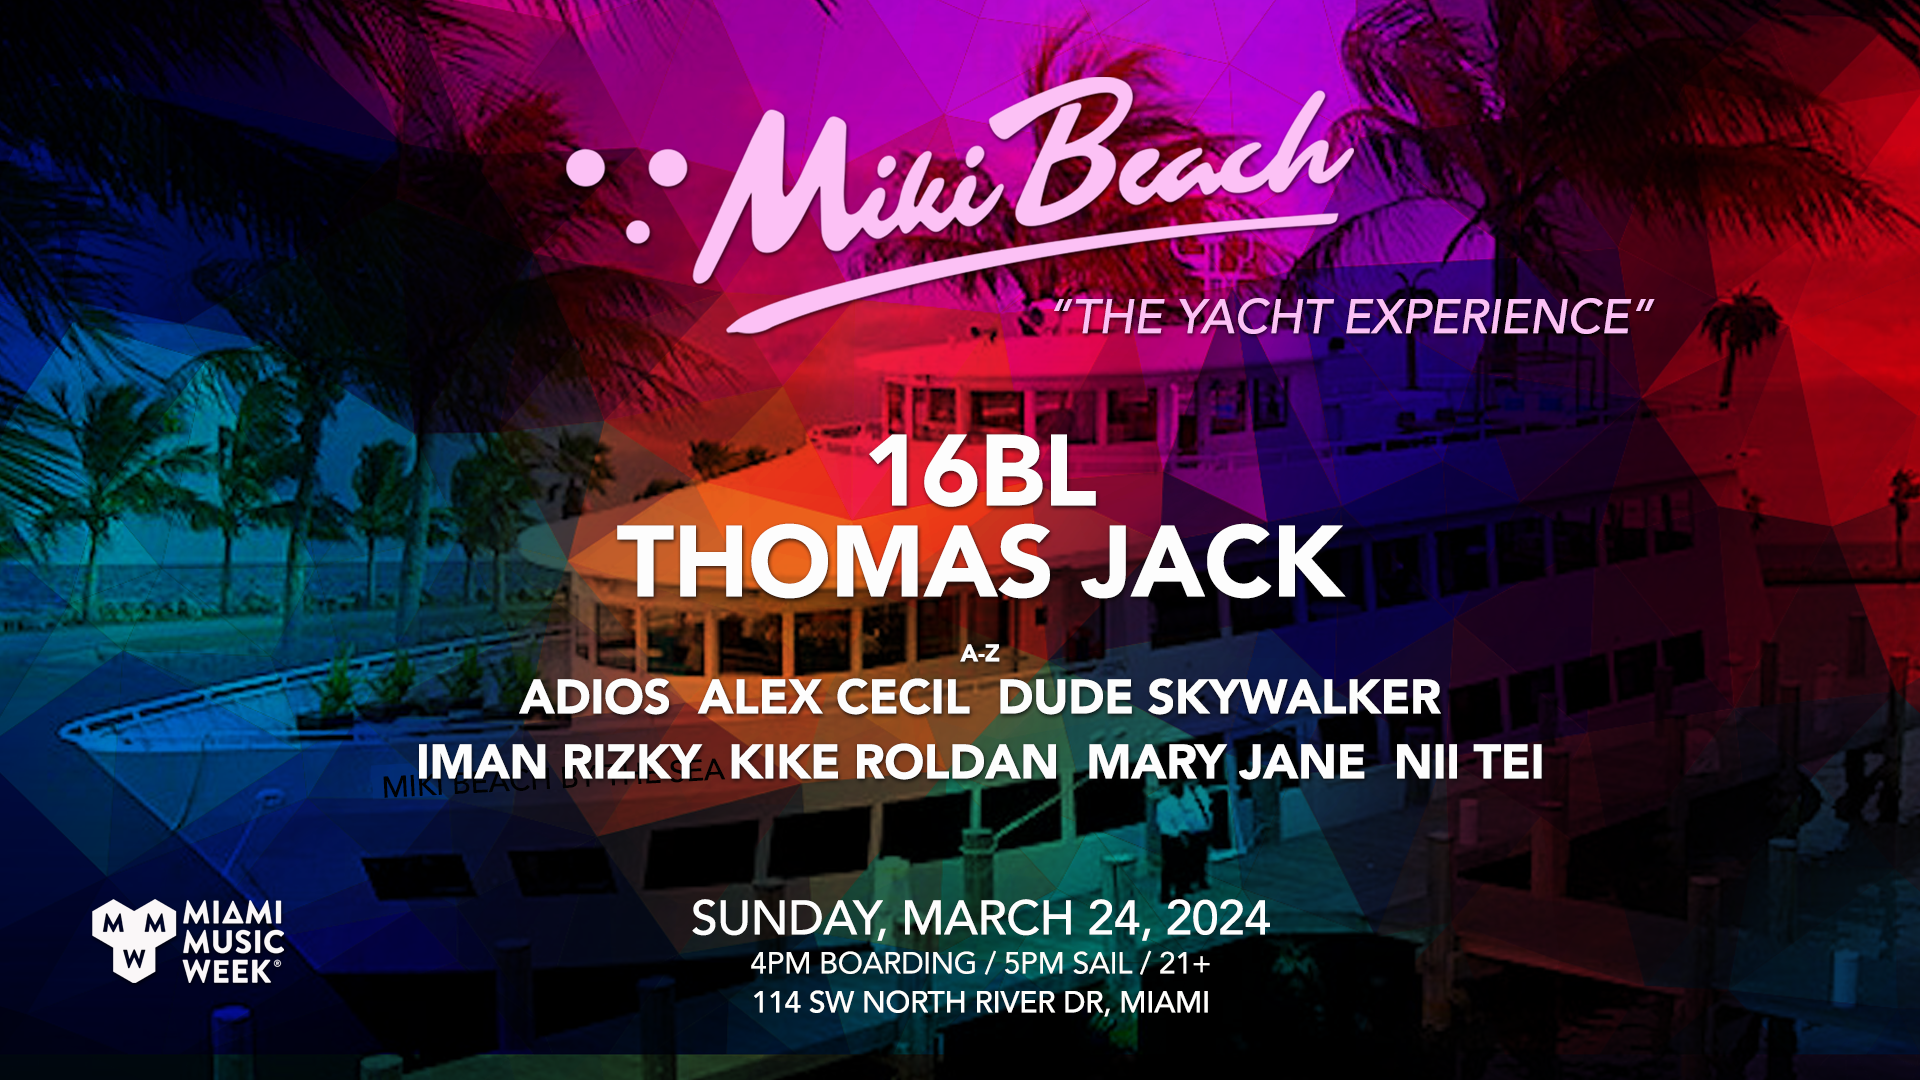 Miki Beach 'The Yacht Experience' - フライヤー表